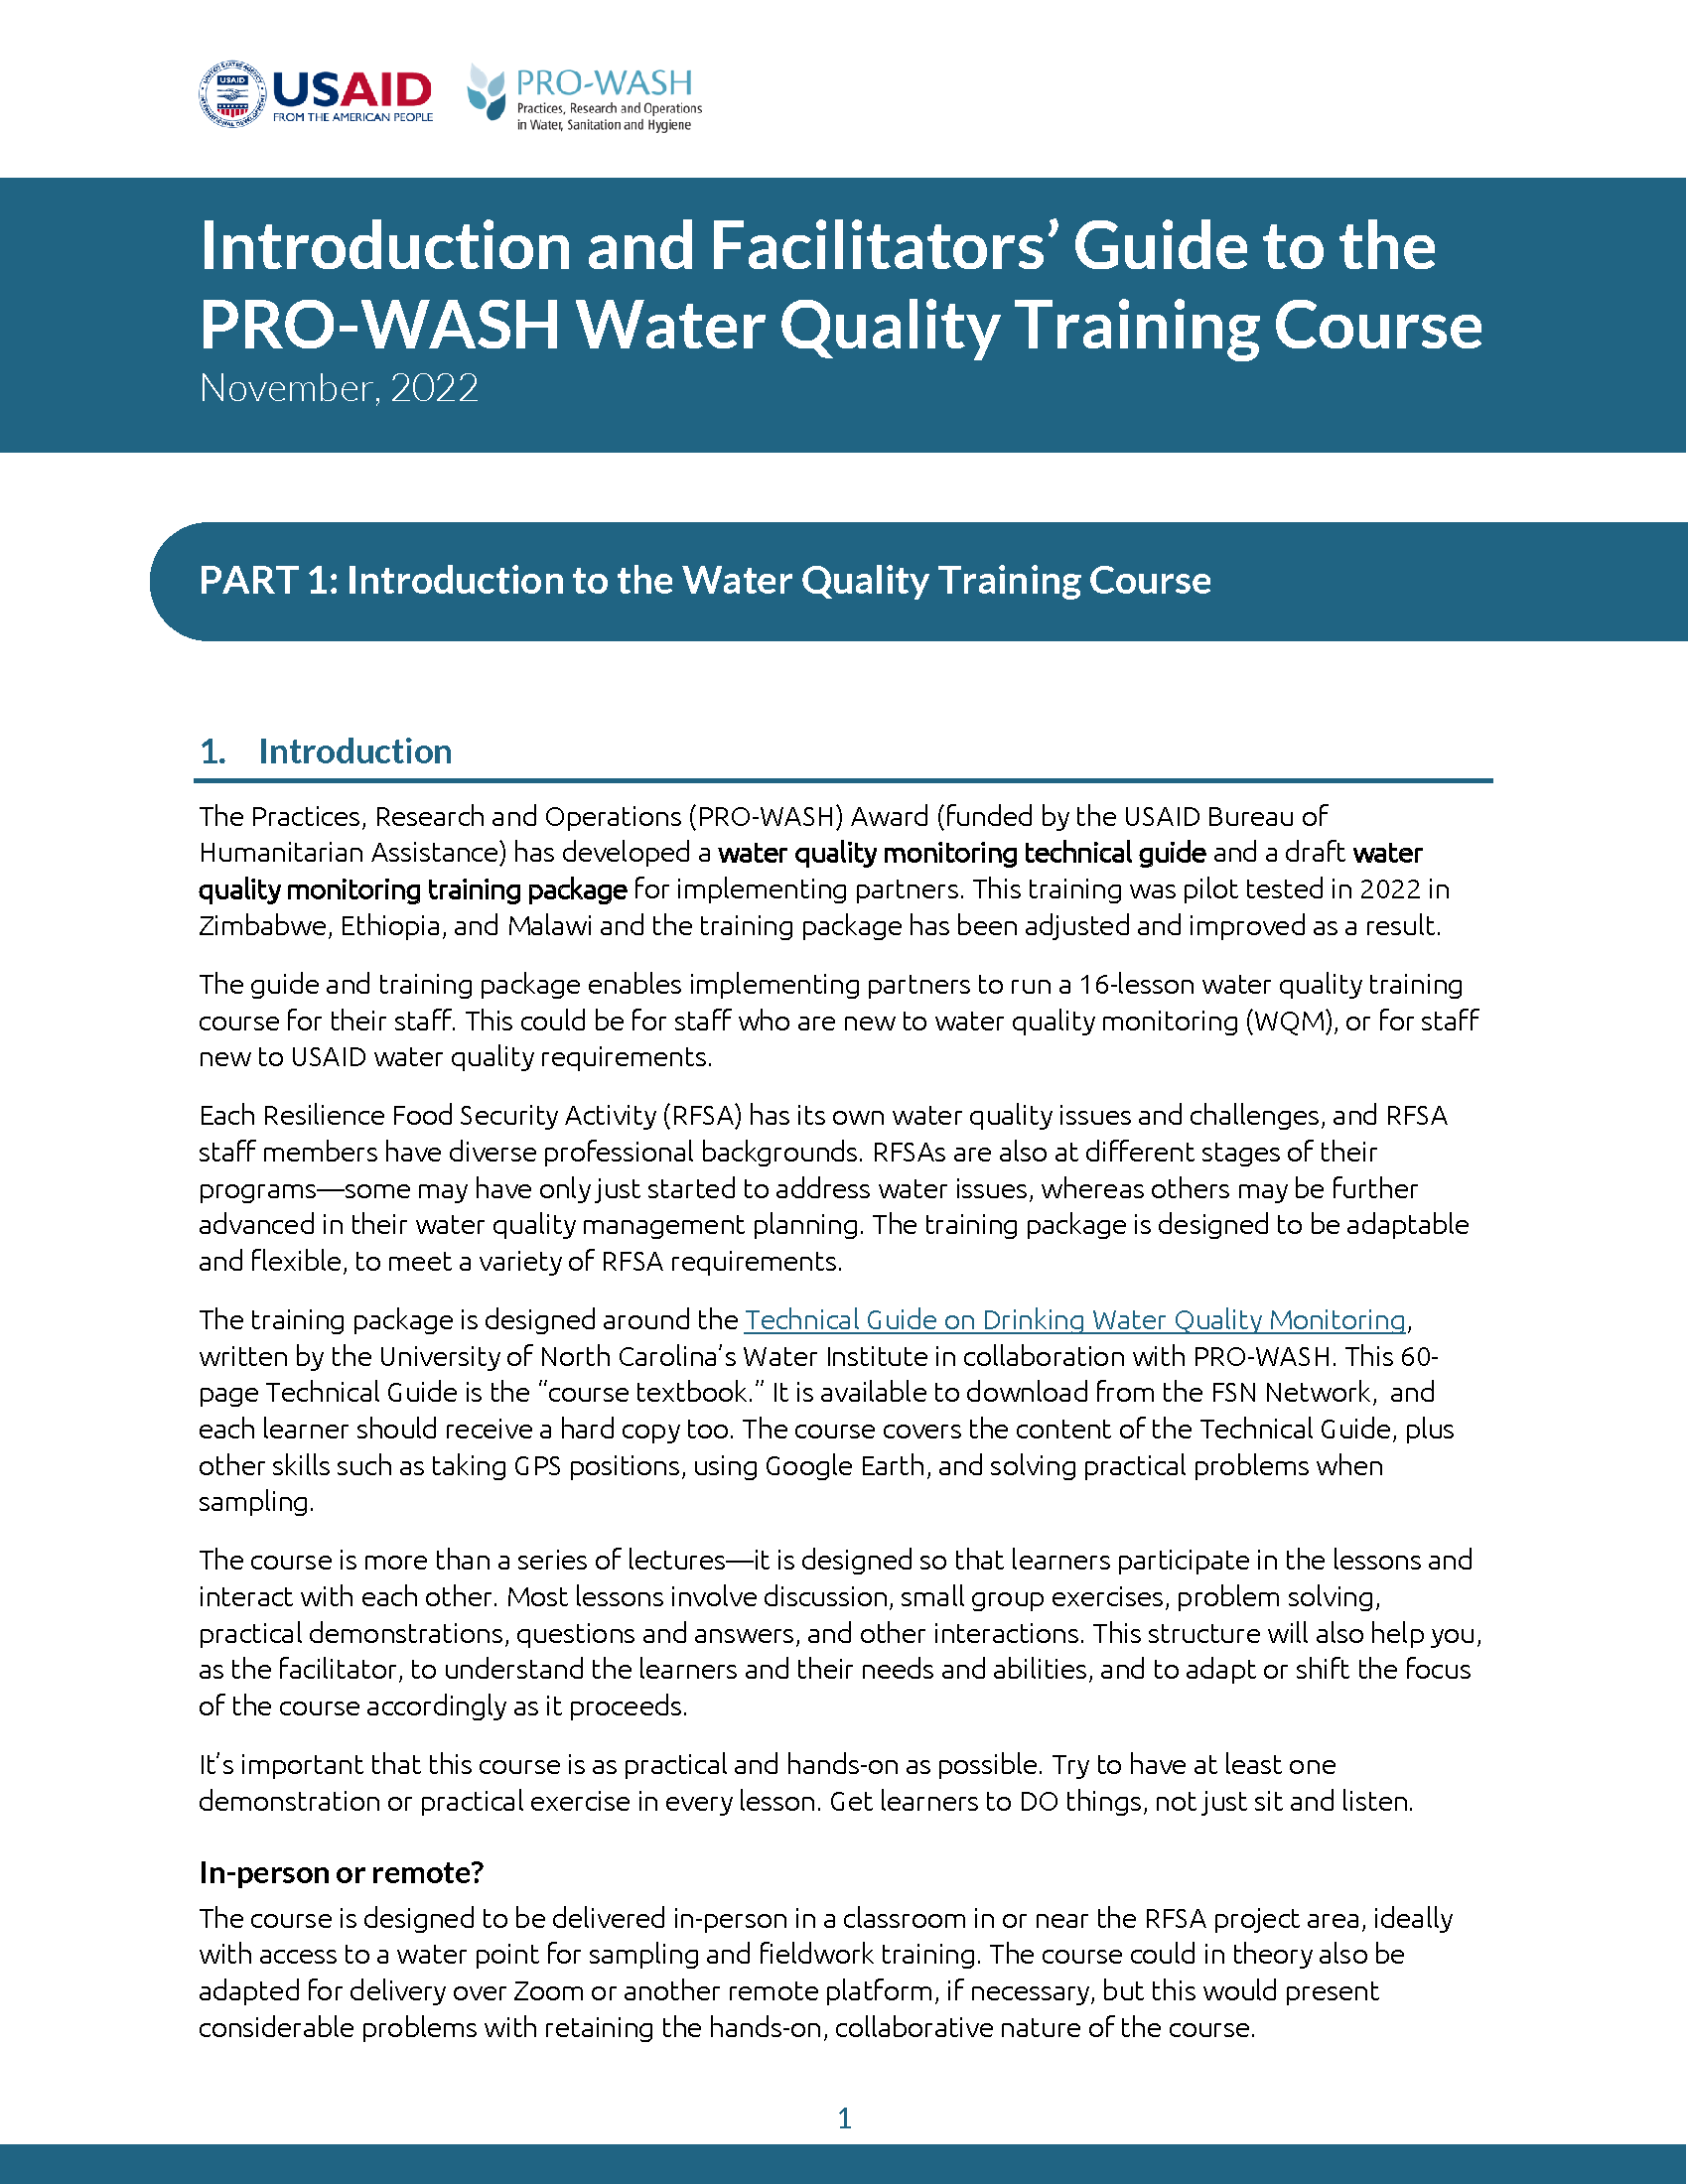 Cover page for PRO-WASH Water Quality Training Course